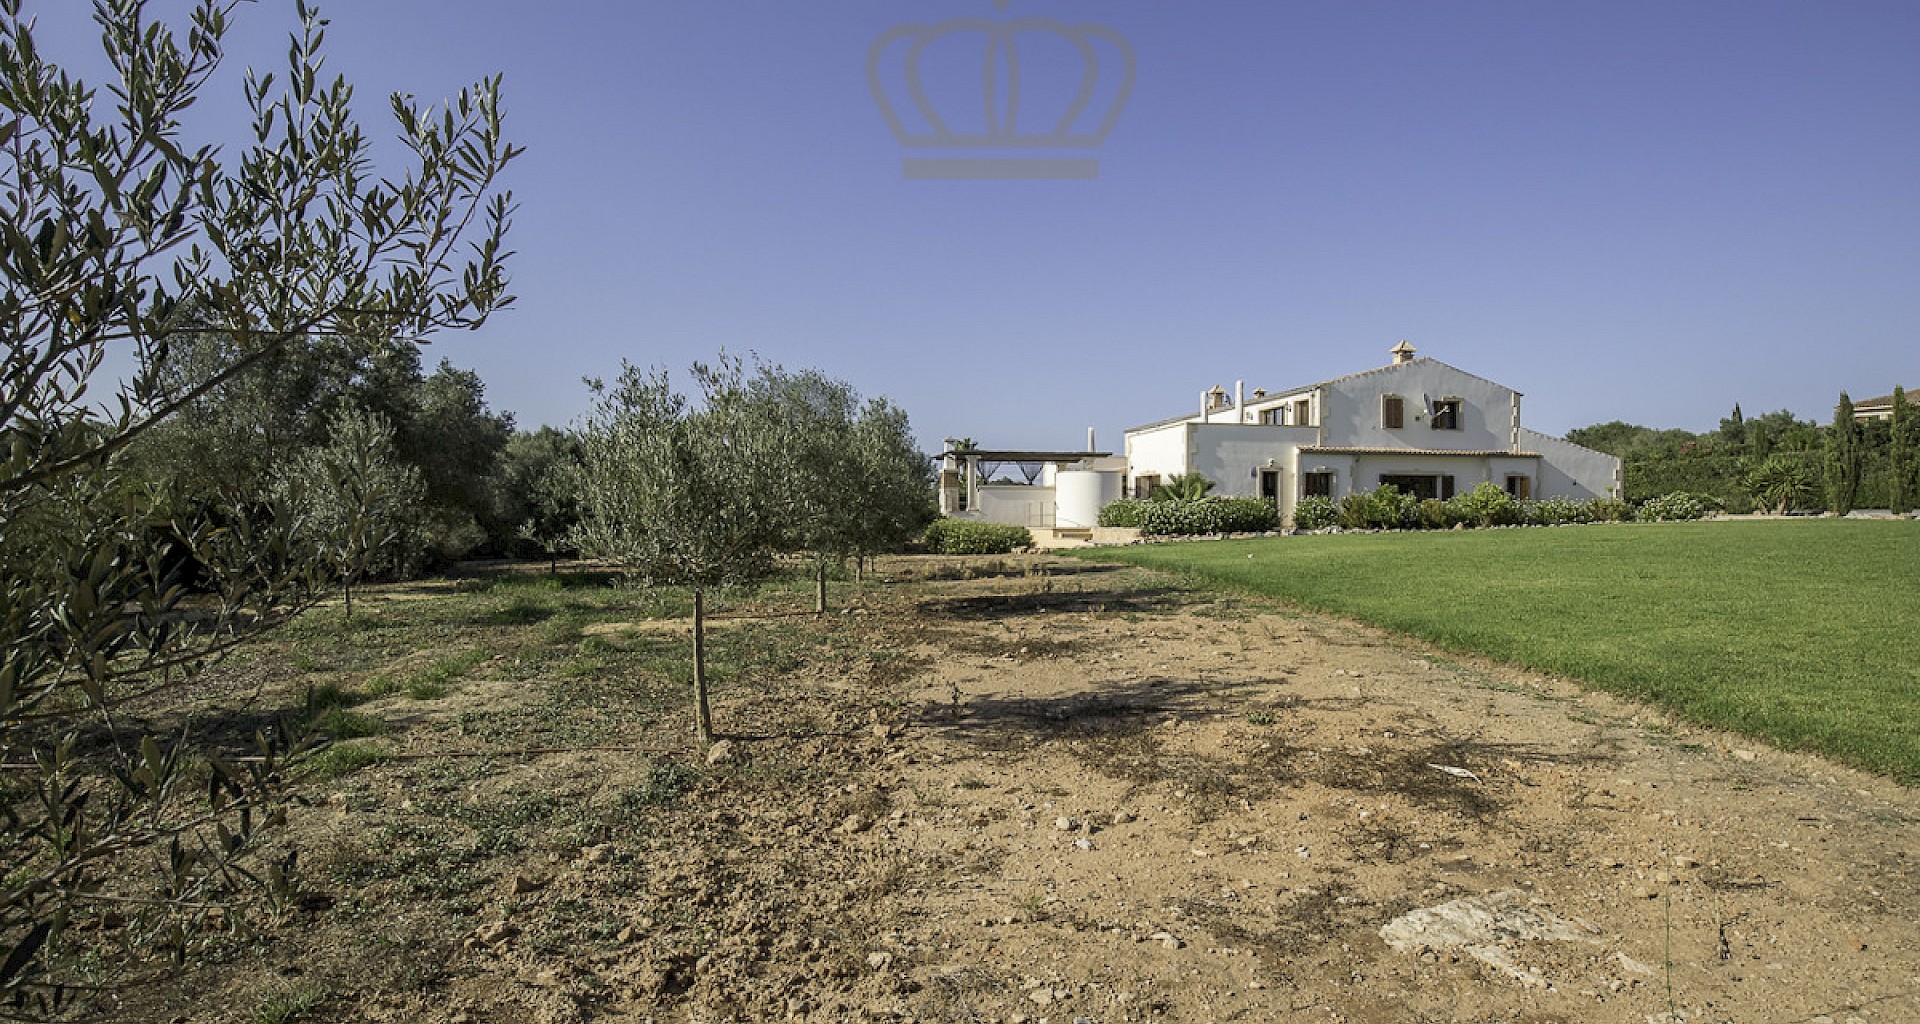 KROHN & LUEDEMANN Finca in mint condition near Palma with large pool and plot of land 